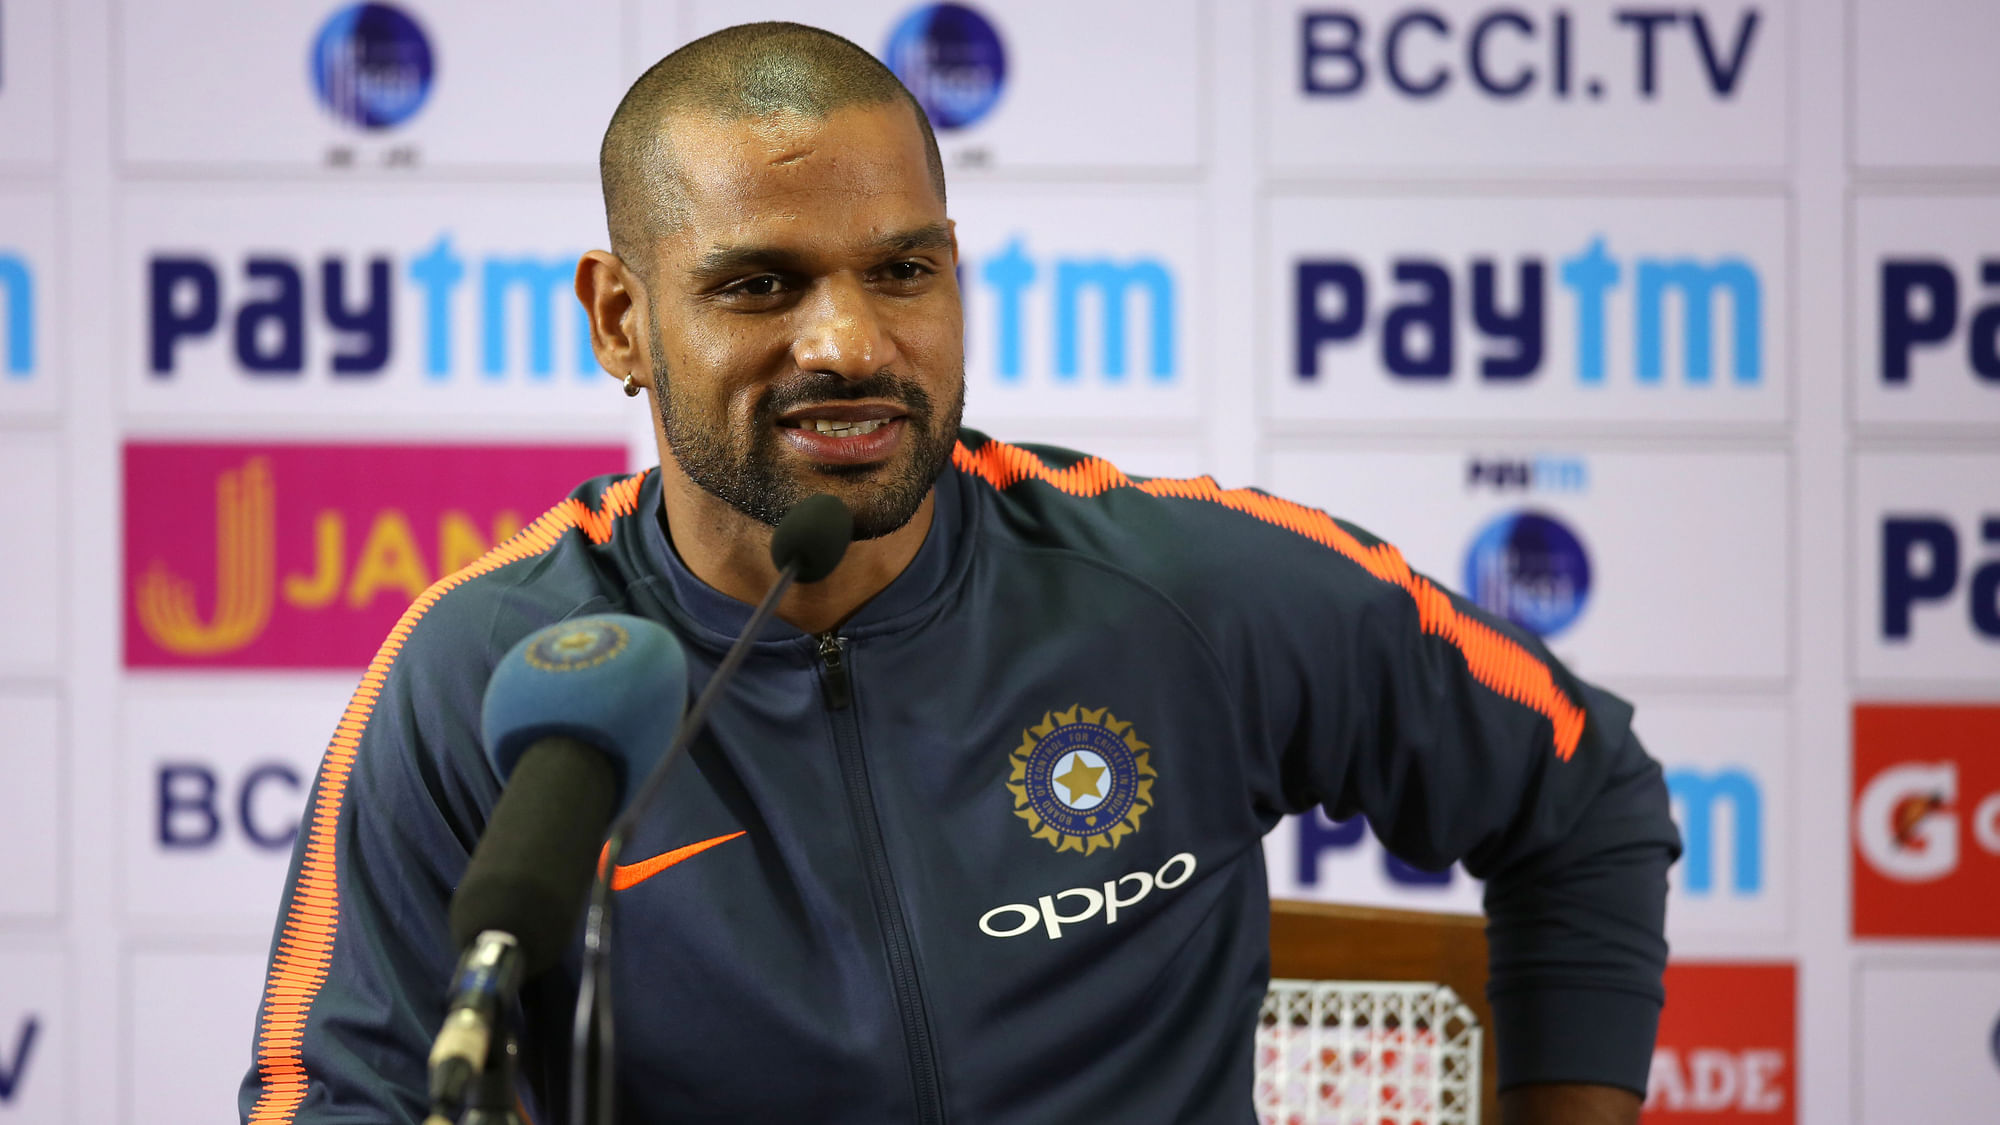 Shikhar Dhawan speaks to the media after Day 1 of the Bengaluru Test against Afghanistan.